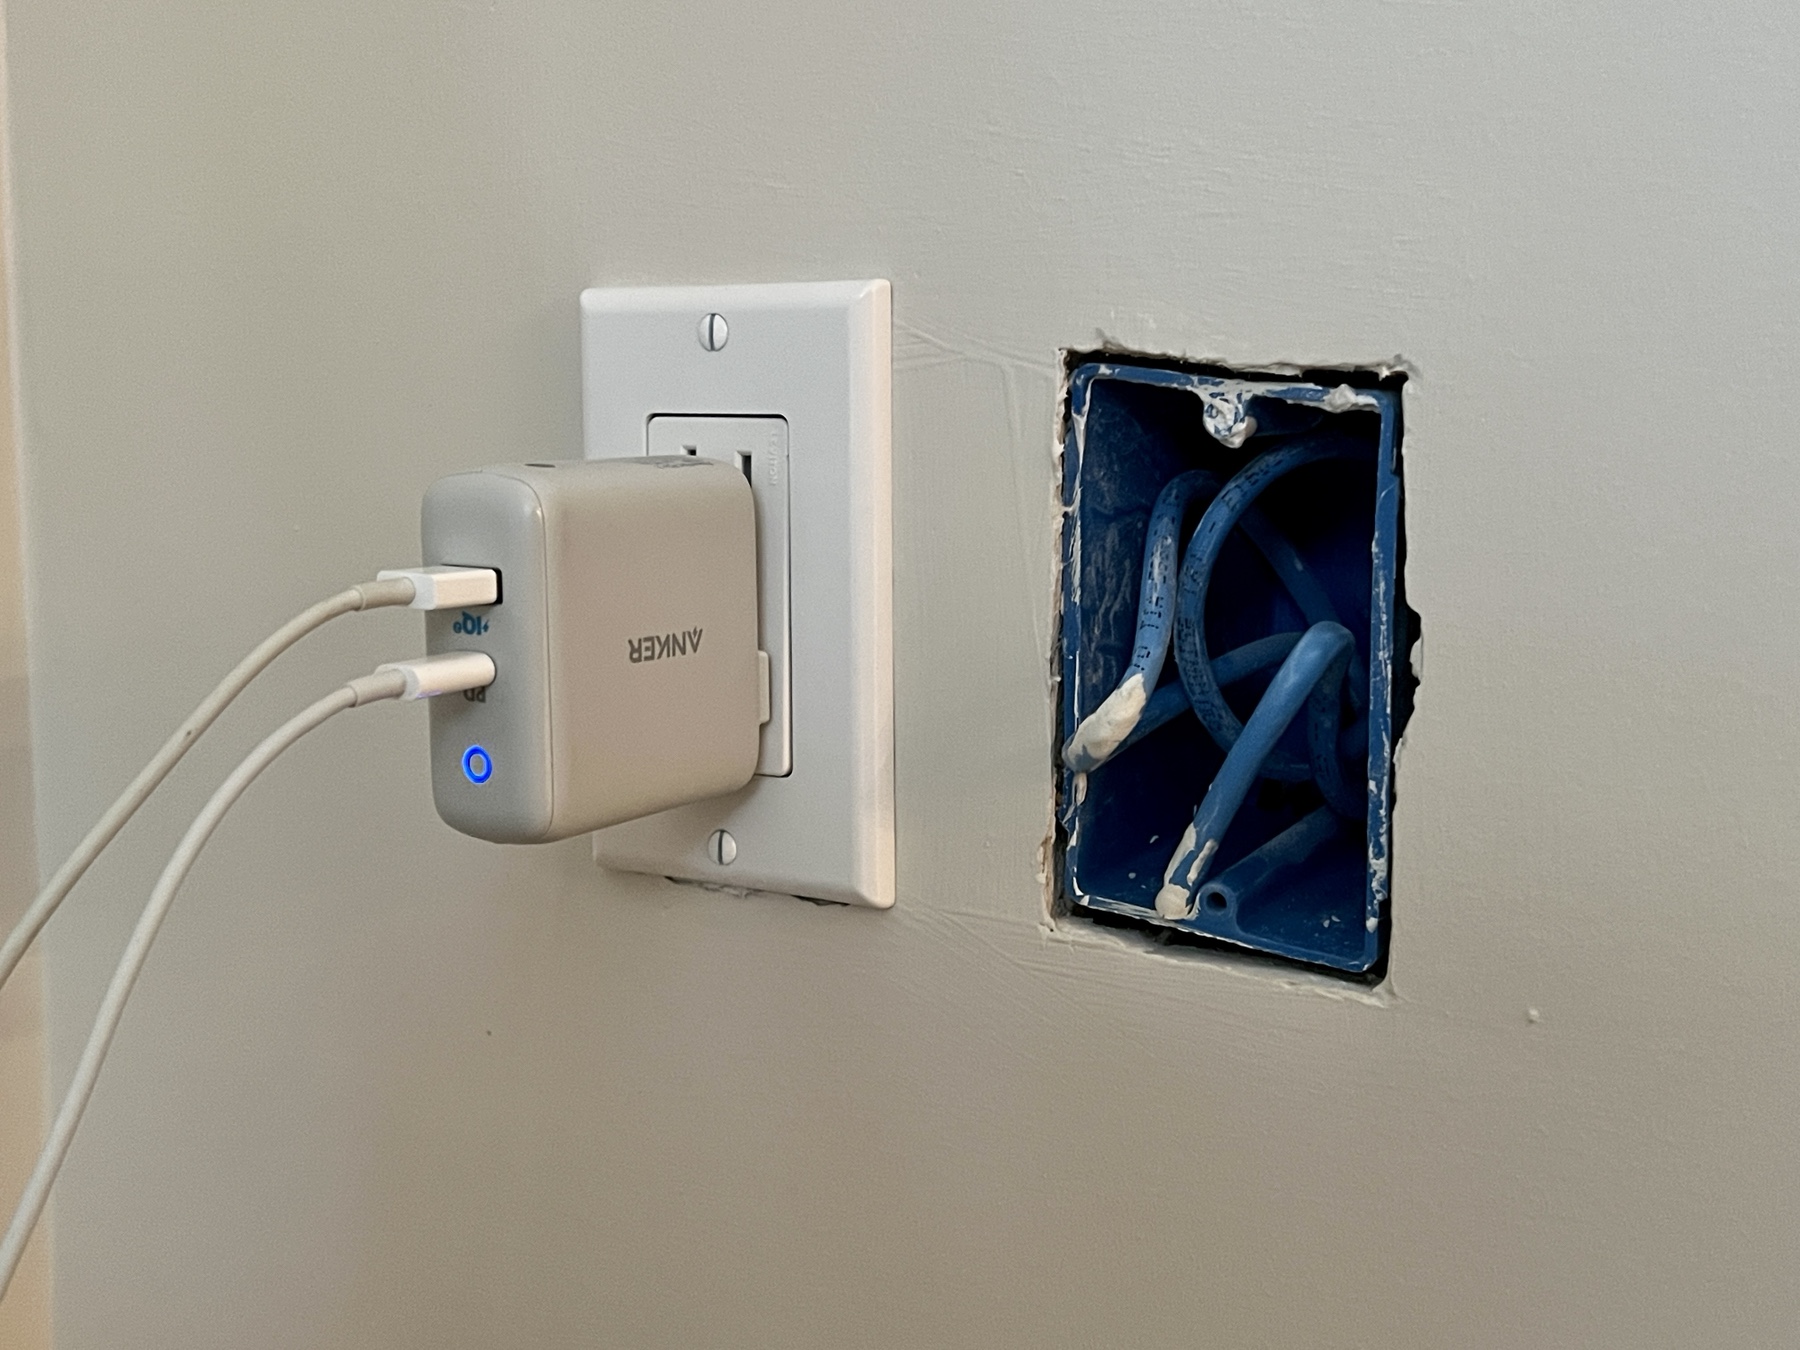 power receptacle with USB charger at left and partially installed ethernet port at right